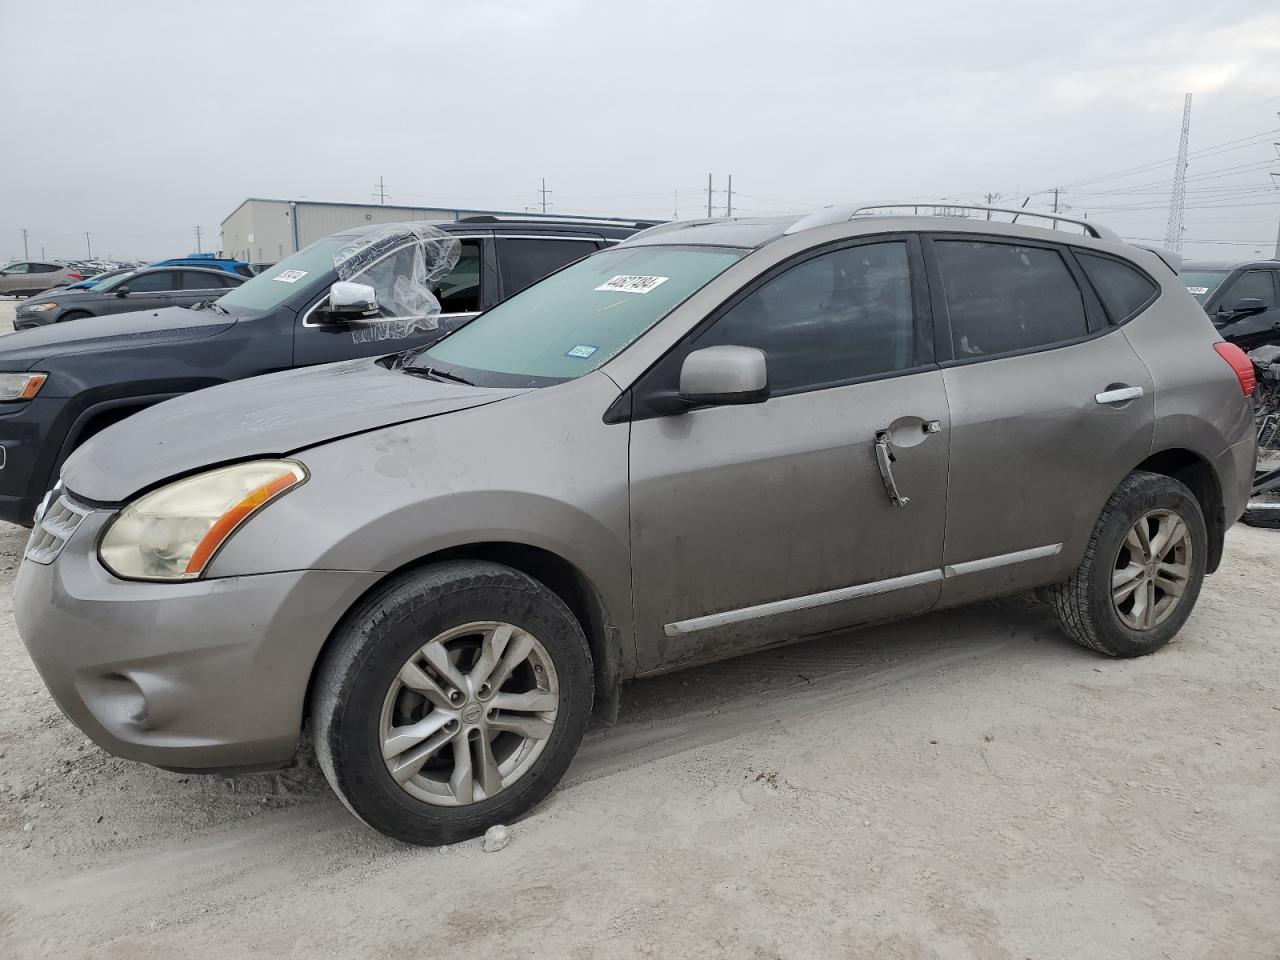 vin: JN8AS5MT1CW611659 JN8AS5MT1CW611659 2012 nissan rogue 2500 for Sale in 76052 3840, Tx - Ft. Worth, Haslet, USA